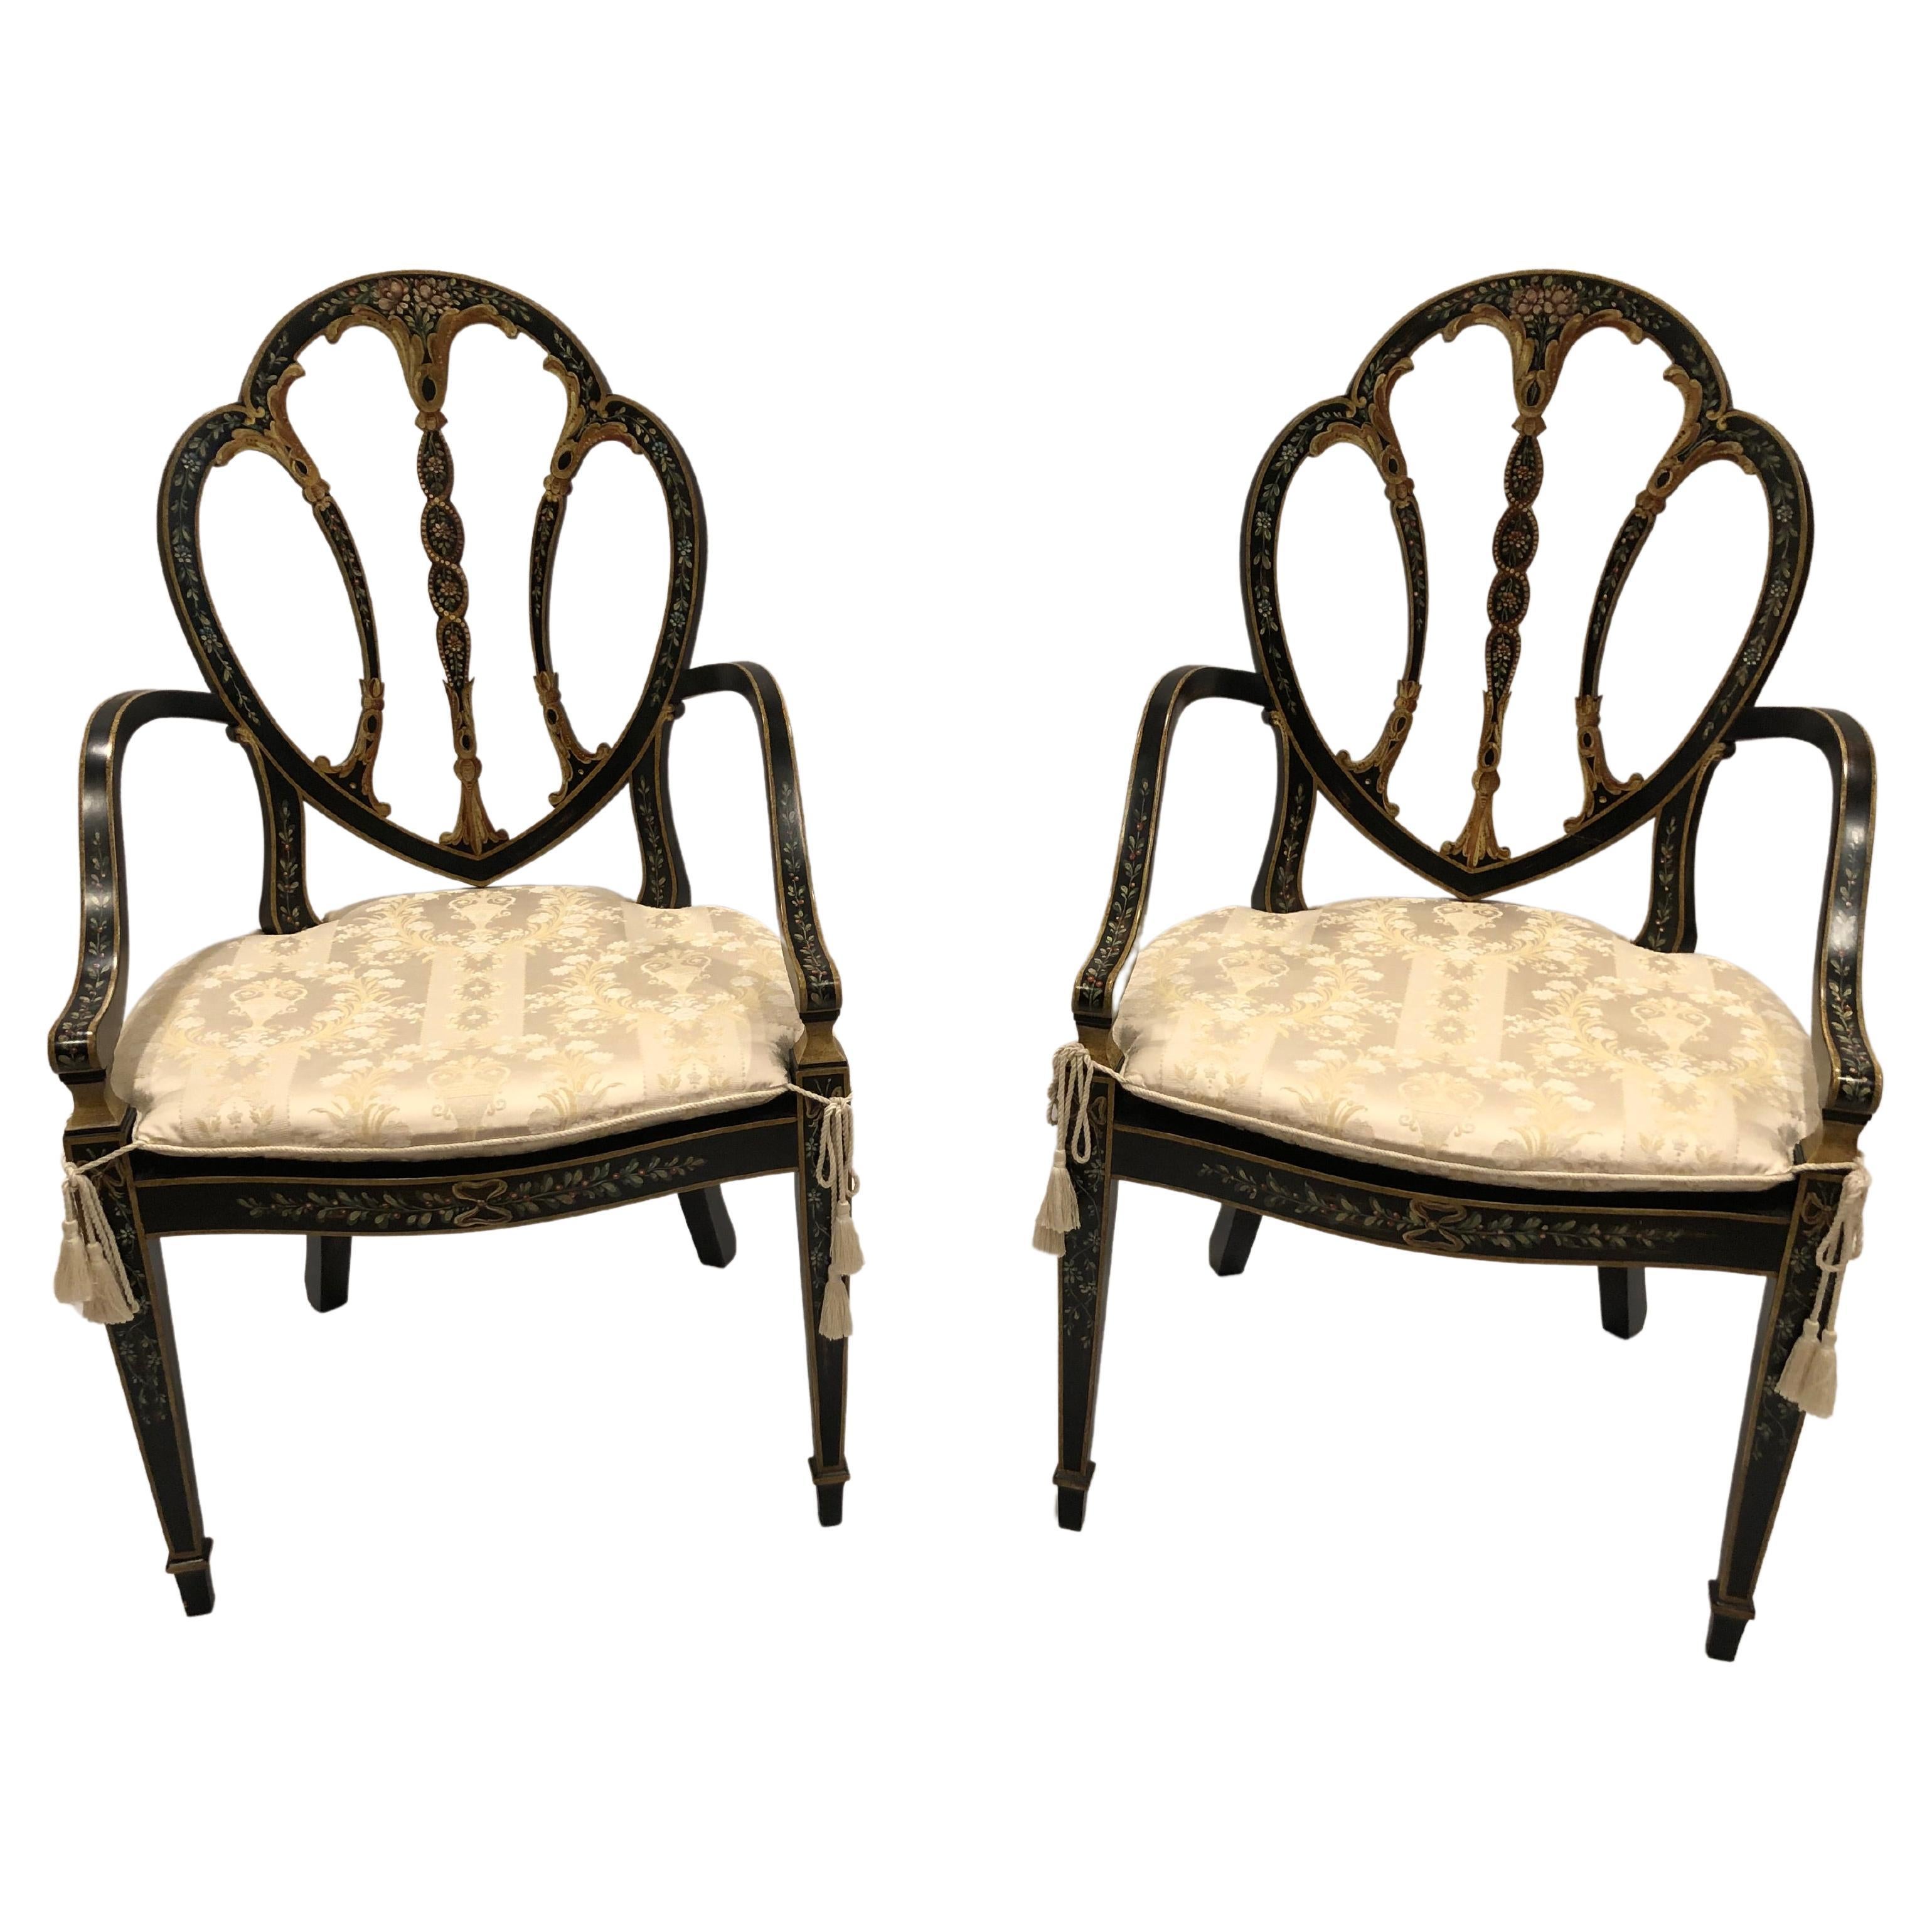 Superb Pair of Adam Style Handpainted Armchairs with Caned Seats